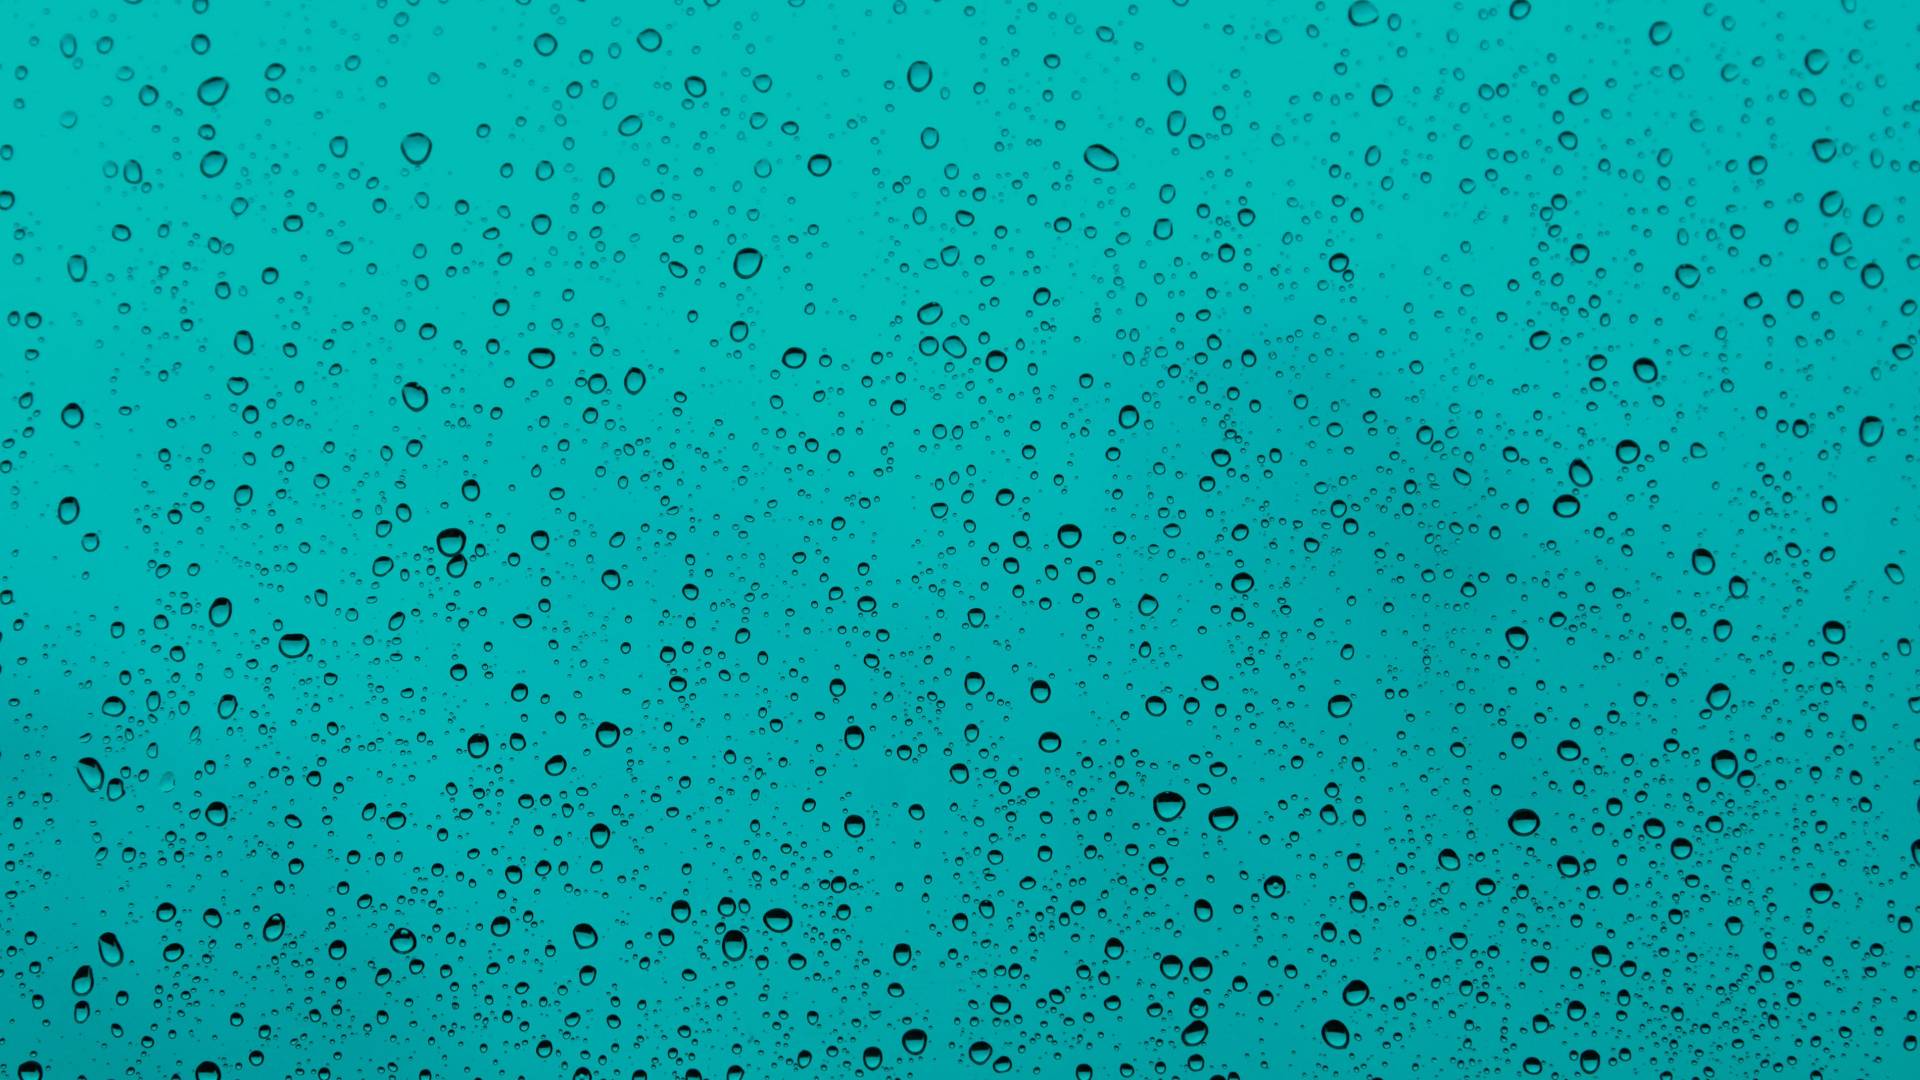 waterdrops on a blue background